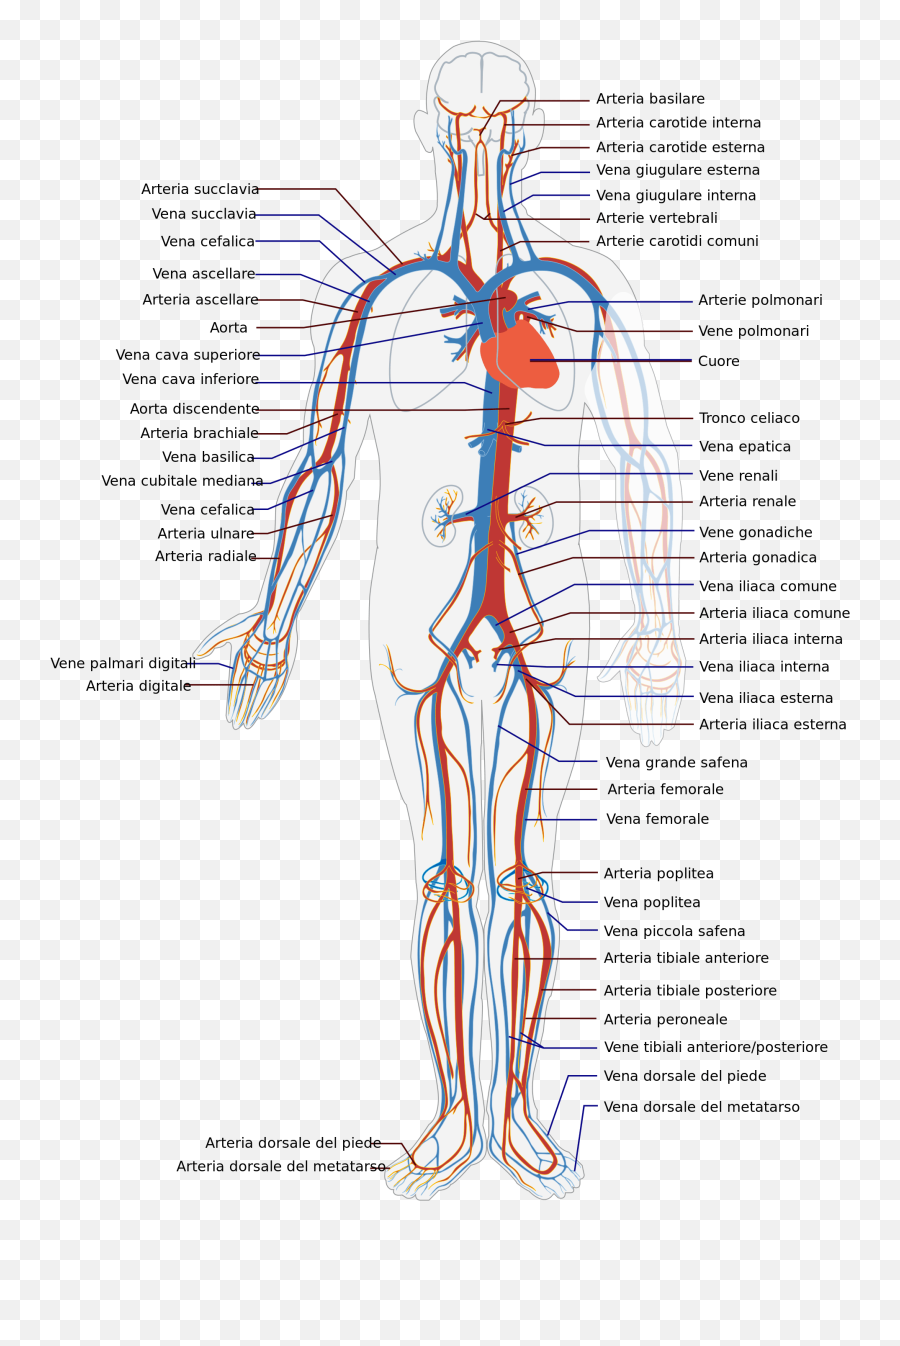 Graphics12png 12441760 Pixels Human Circulatory System - Venous Drainage Of Whole Body Emoji,Emotion Code Heart Wall Flow Chart